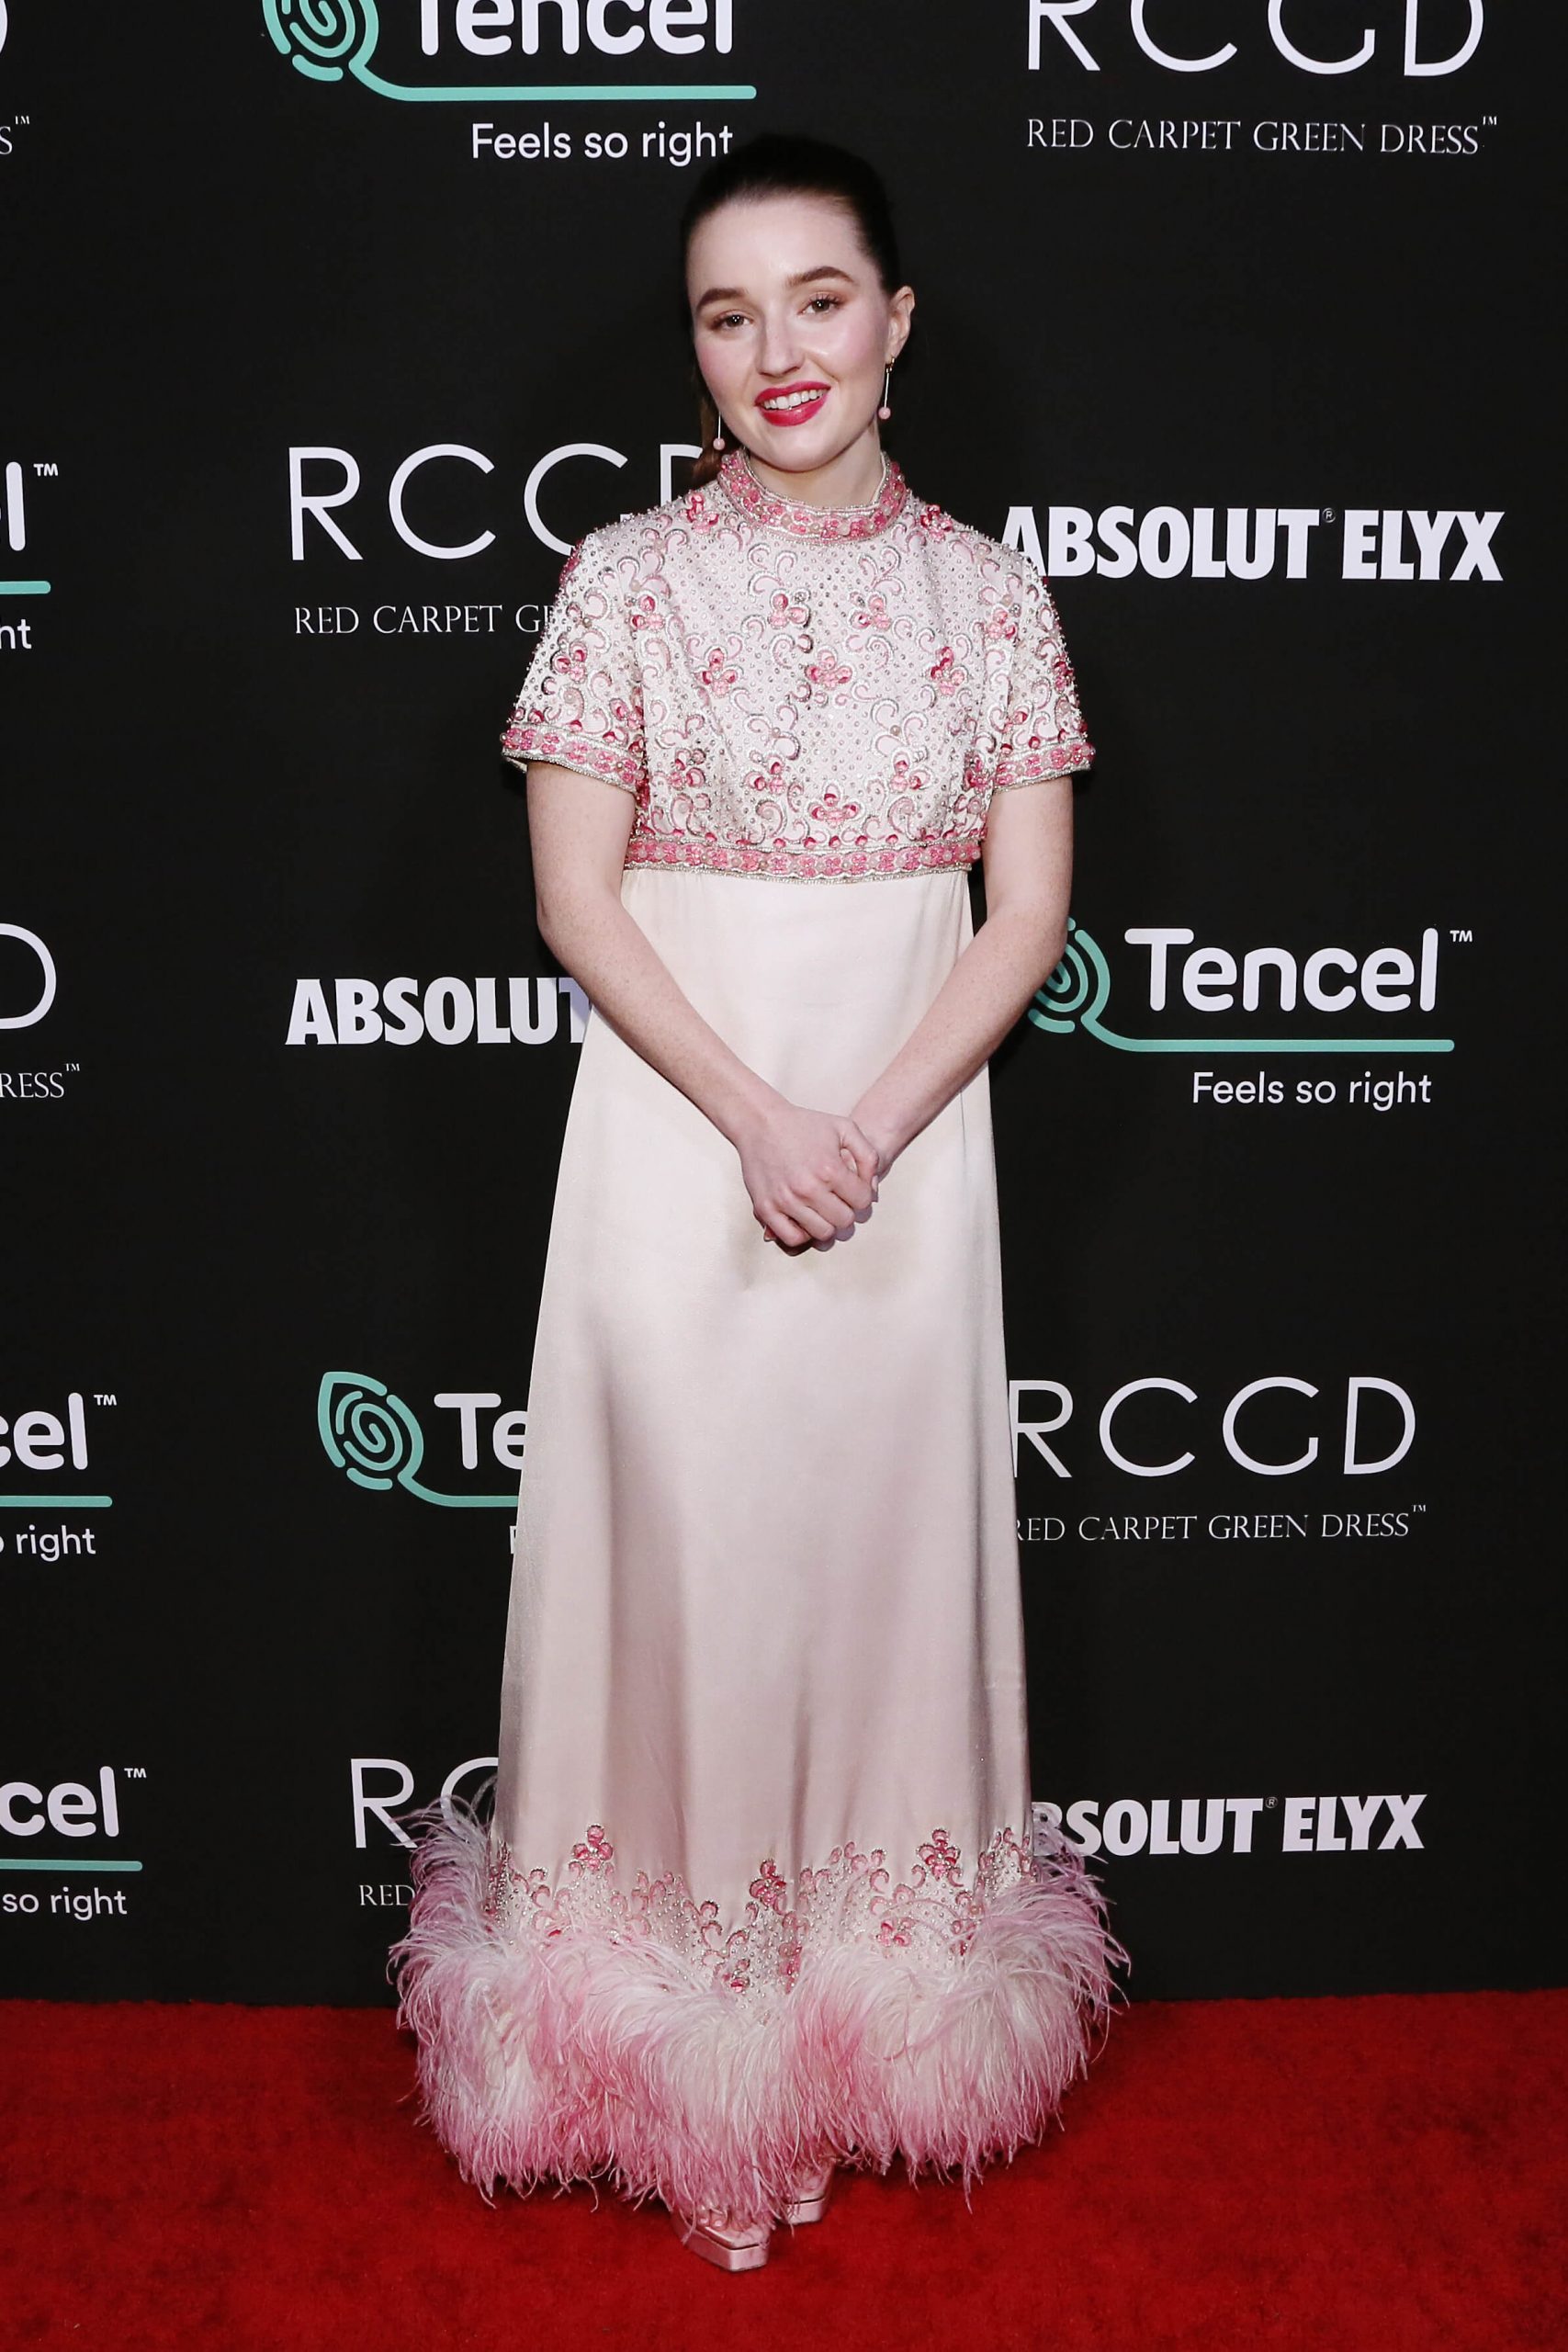 LOS ANGELES, CALIFORNIA - FEBRUARY 06: Kaitlyn Dever attends Red Carpet Green Dress at the Private Residence of Jonas Tahlin, CEO of Absolut Elyx on February 06, 2020 in Los Angeles, California. (Photo by Gabriel Olsen/Getty Images for Absolut Elyx)